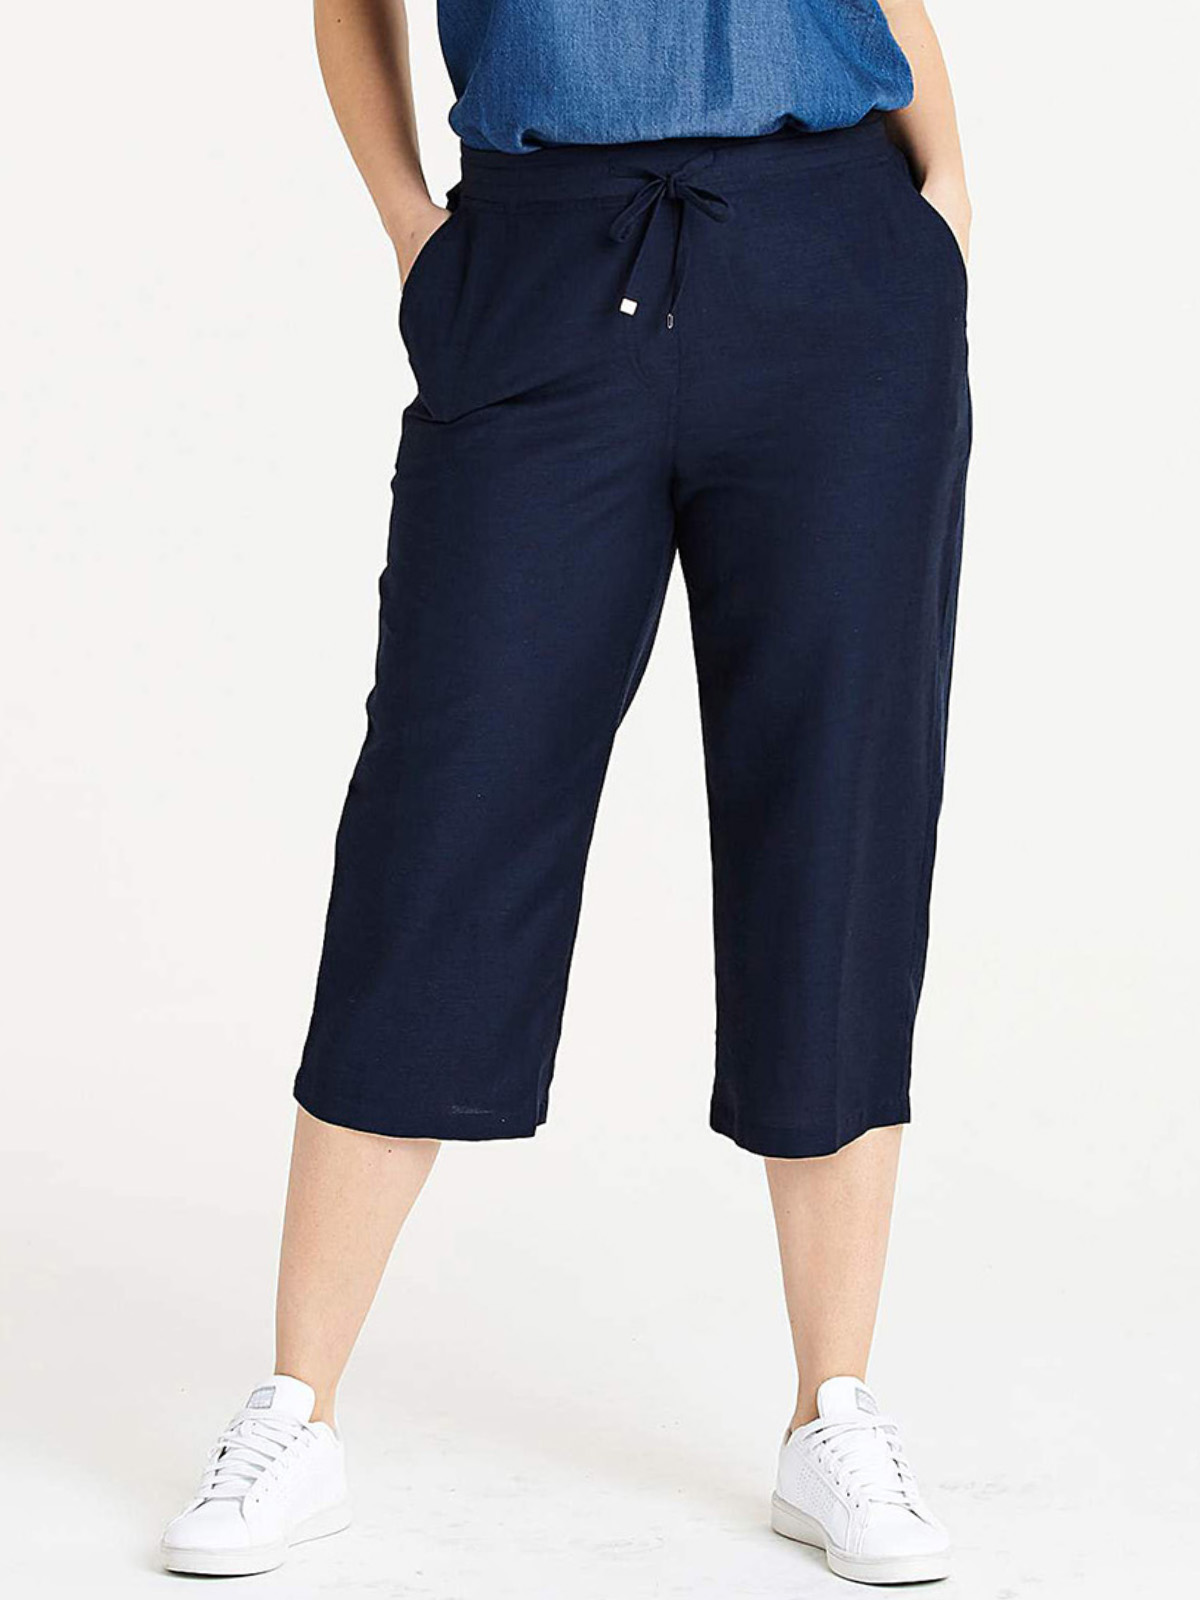 Capsule - - NAVY Linen Blend Cropped Trousers - Plus Size 18 to 22